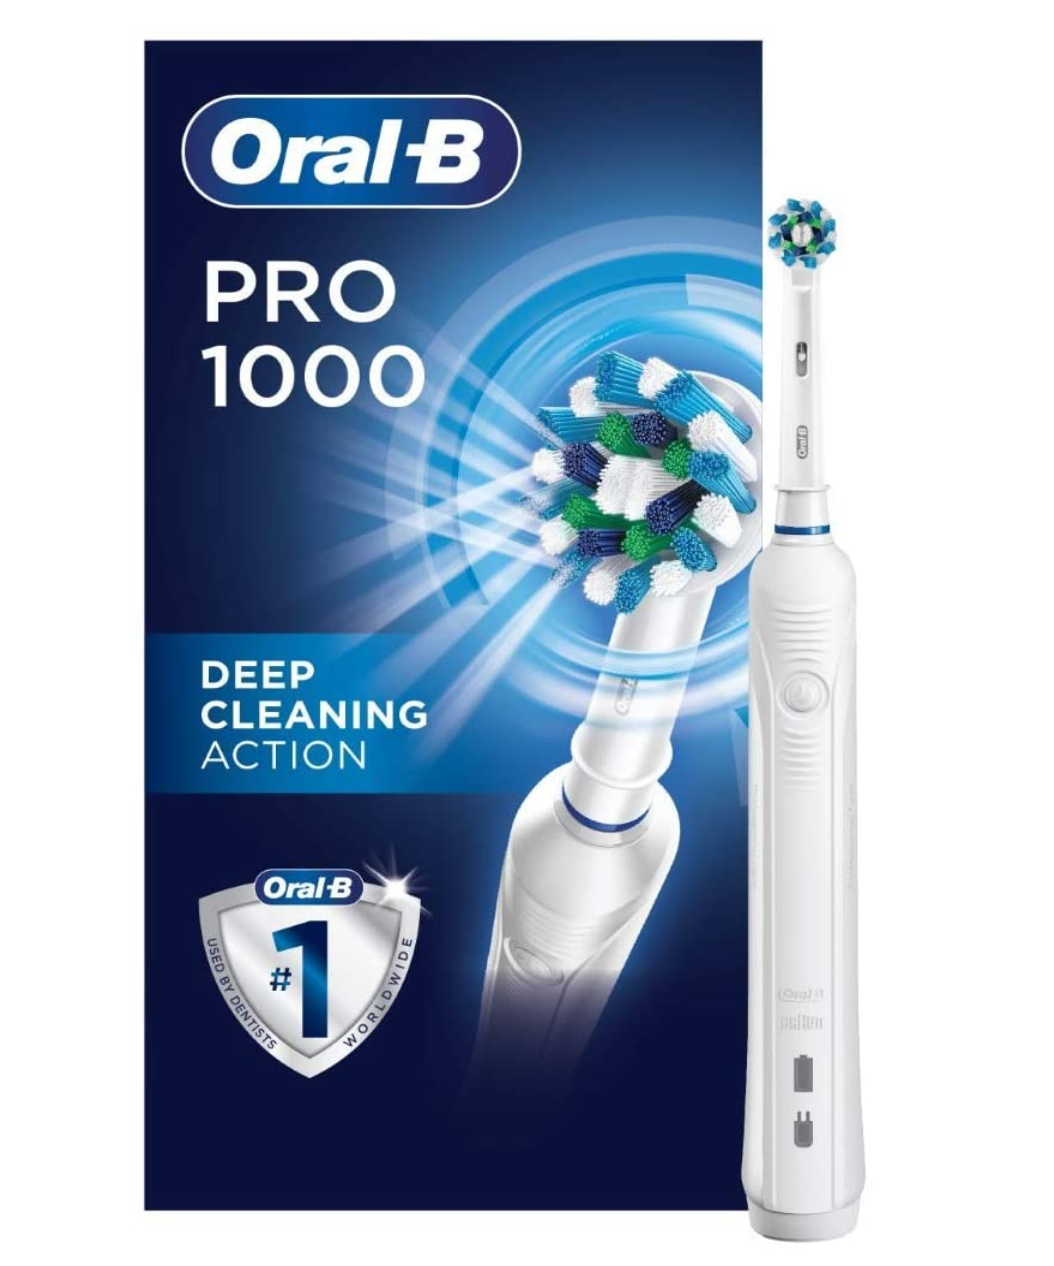 oral-b-pro-bright-white-electric-toothbrush-5645-2020-6-10